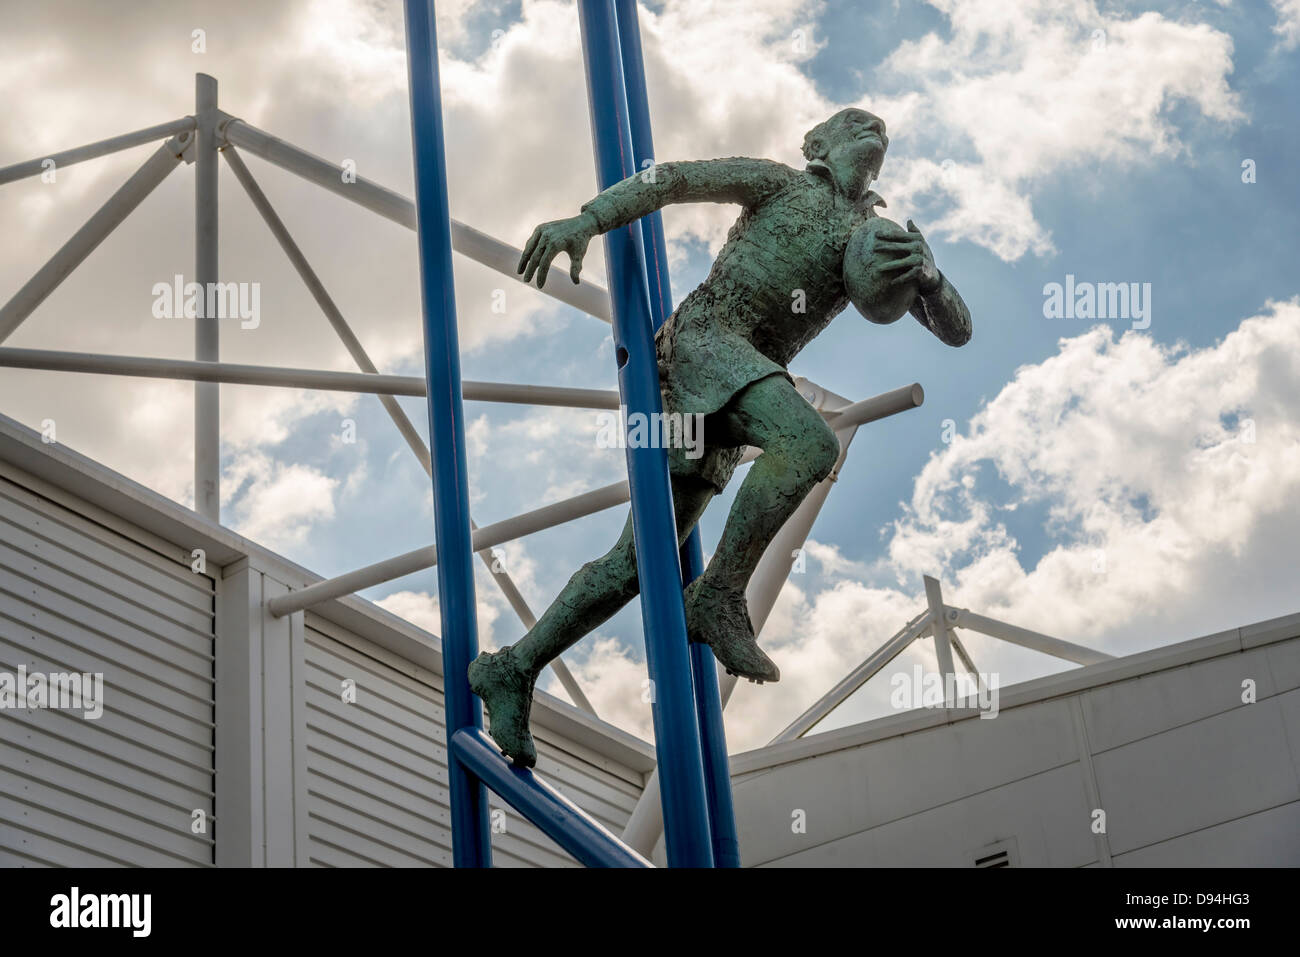 The statue of legendary rugby league payer Brian Bevan at the Warrington Wolves Halliwell Jones stadium. Stock Photo